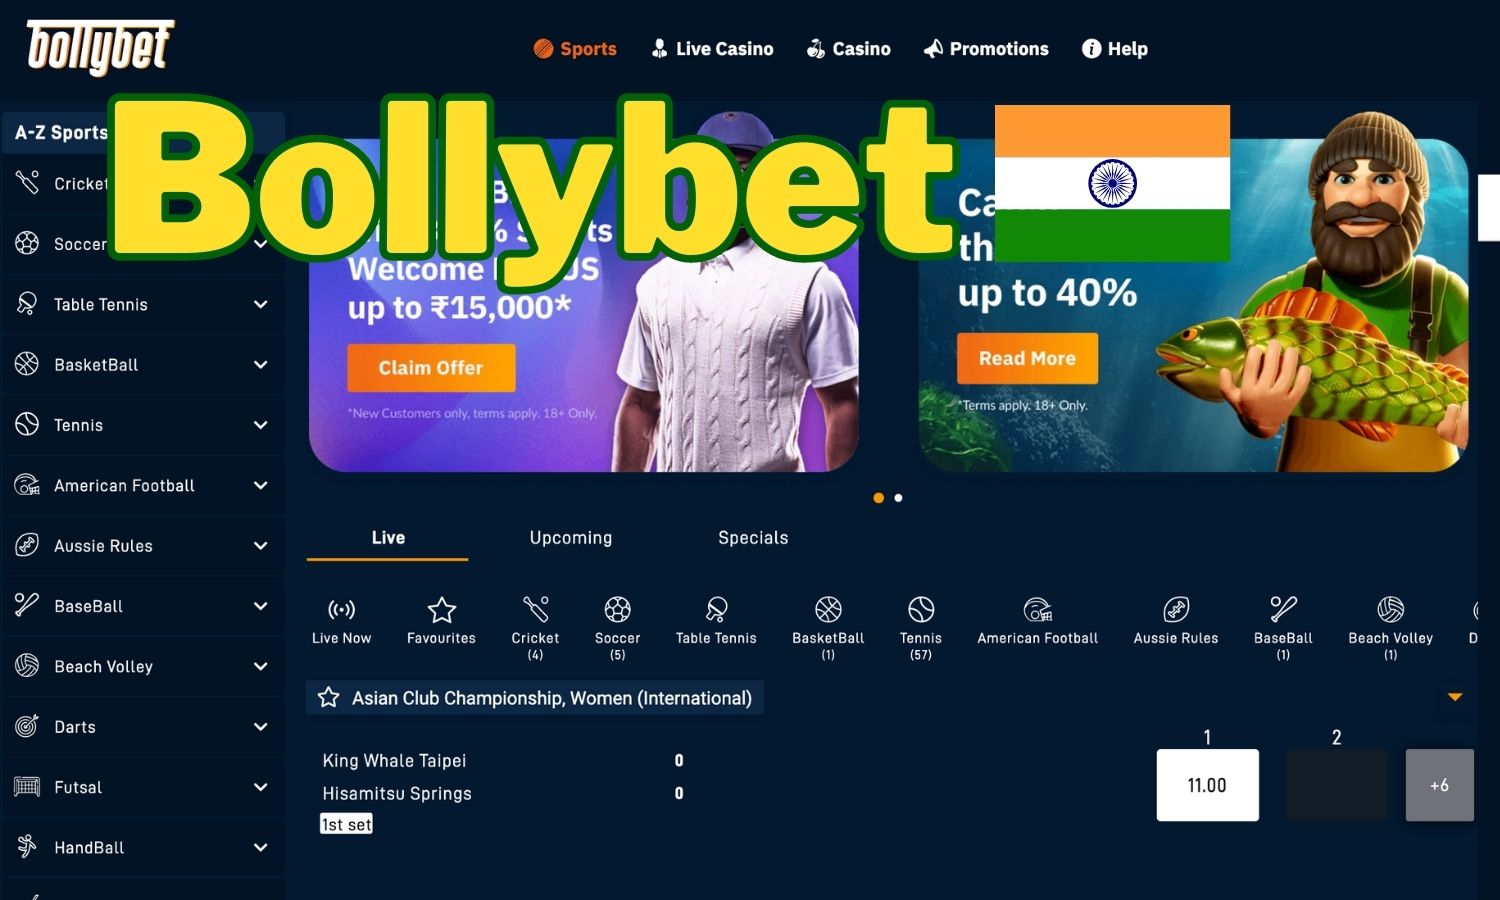 Bollybet sports betting website review in India